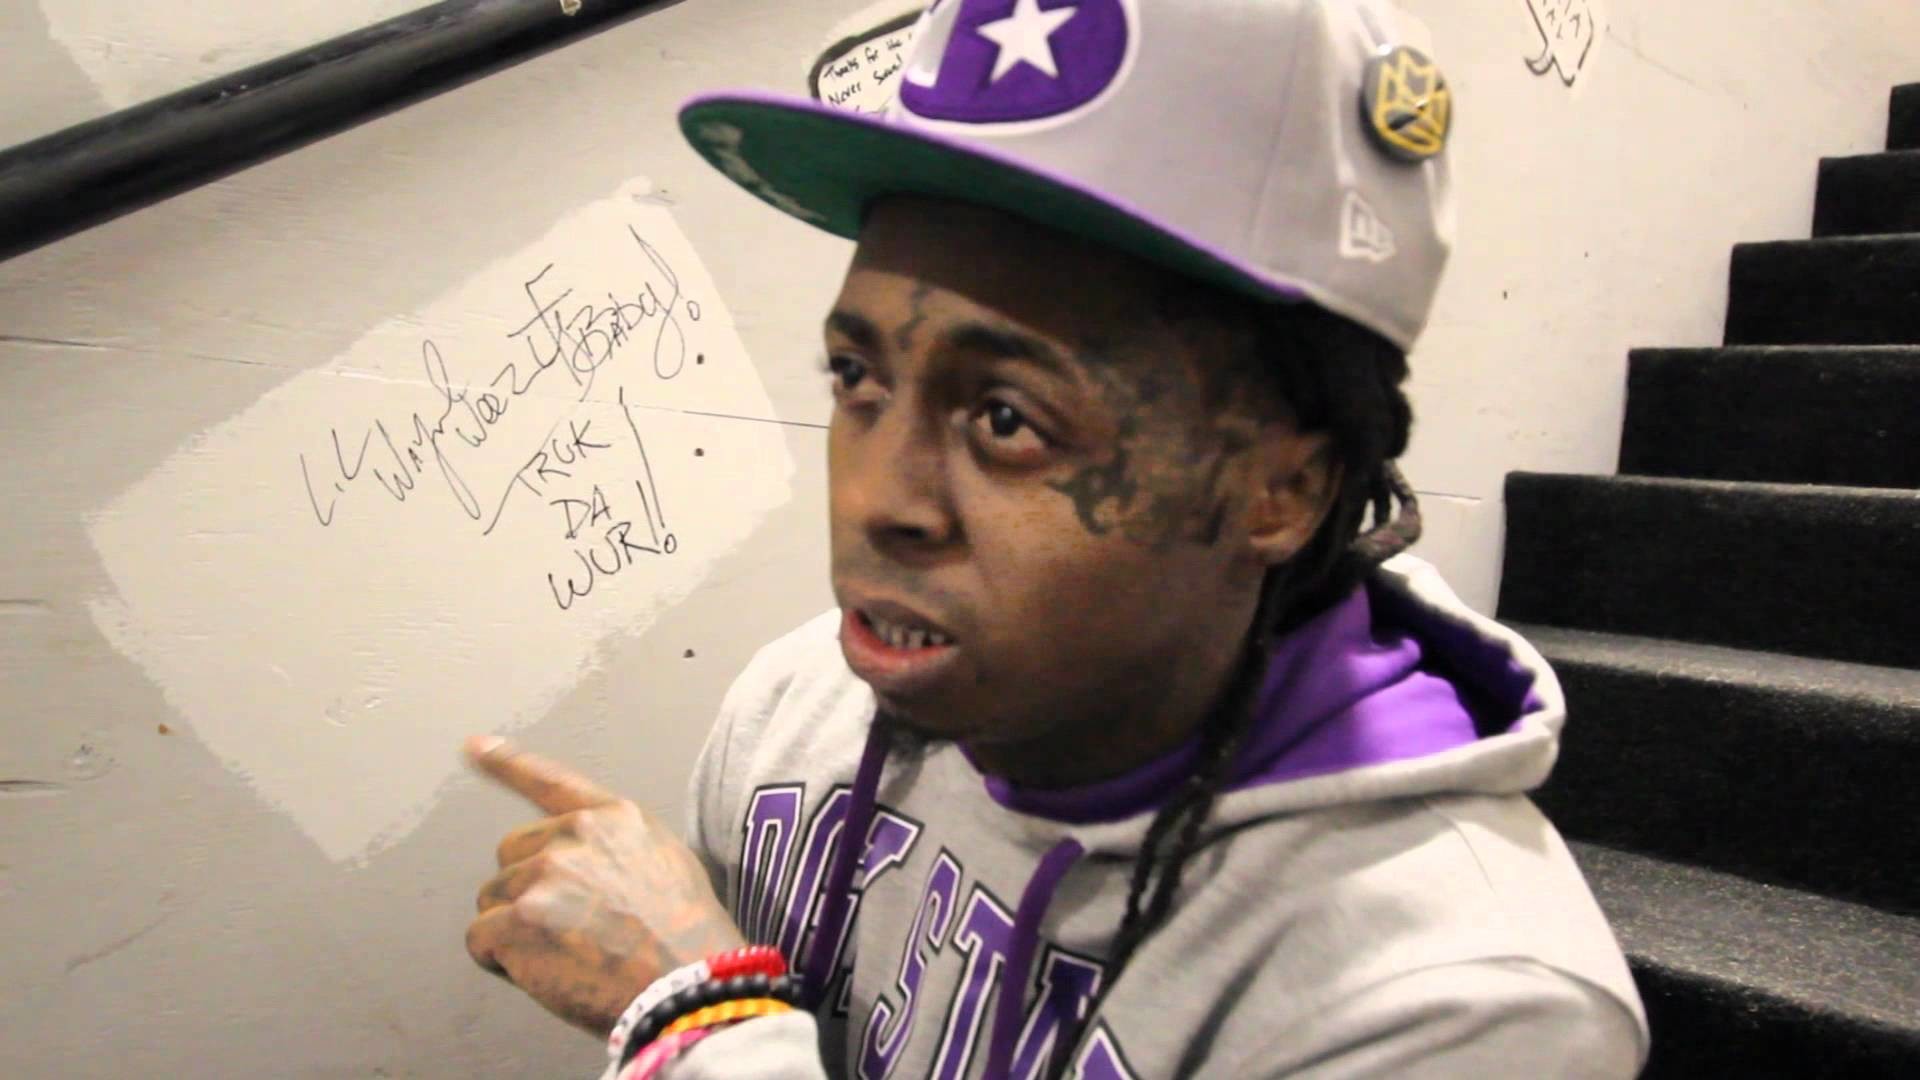 1920x1080 Lil' Wayne Droppin' Some Knowledge at the Barn - With Loop Control -  YouTube for Musicians